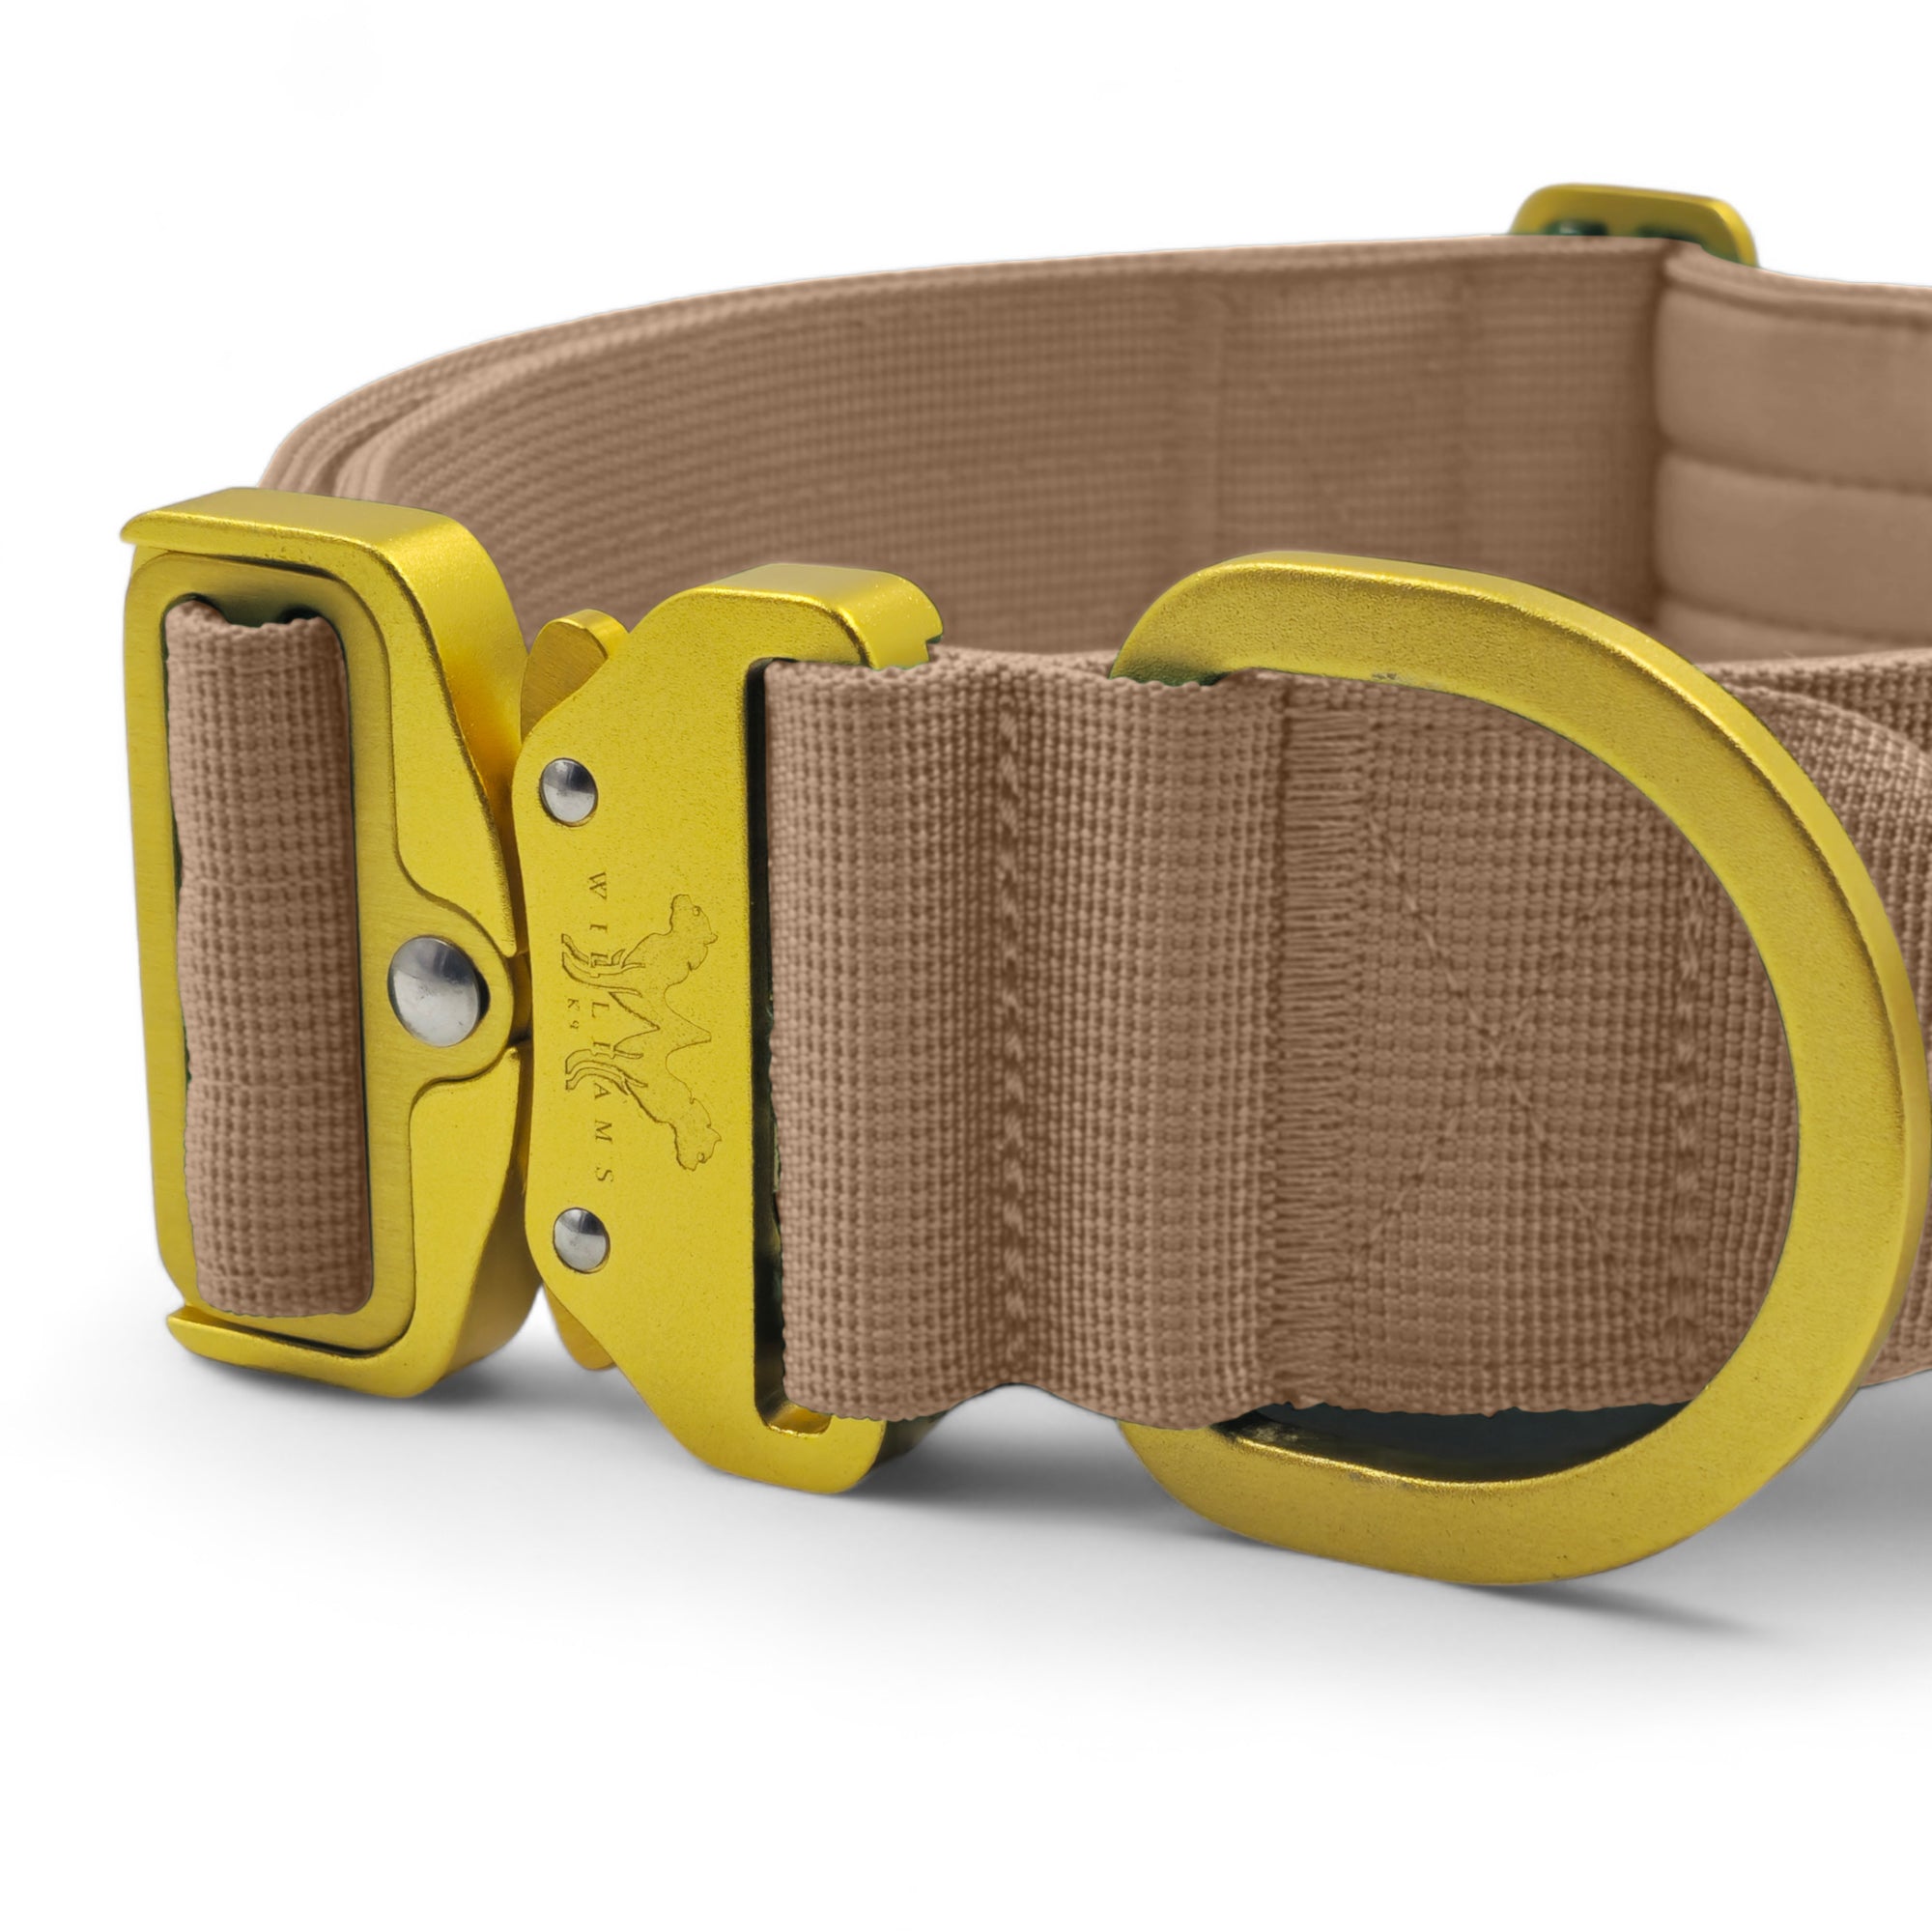 Light Tactical Collar 5CM Military Tan | Quad Stitched Nylon Lightweight Gold Aluminium Buckle + D Ring Adjustable Collar With Handle